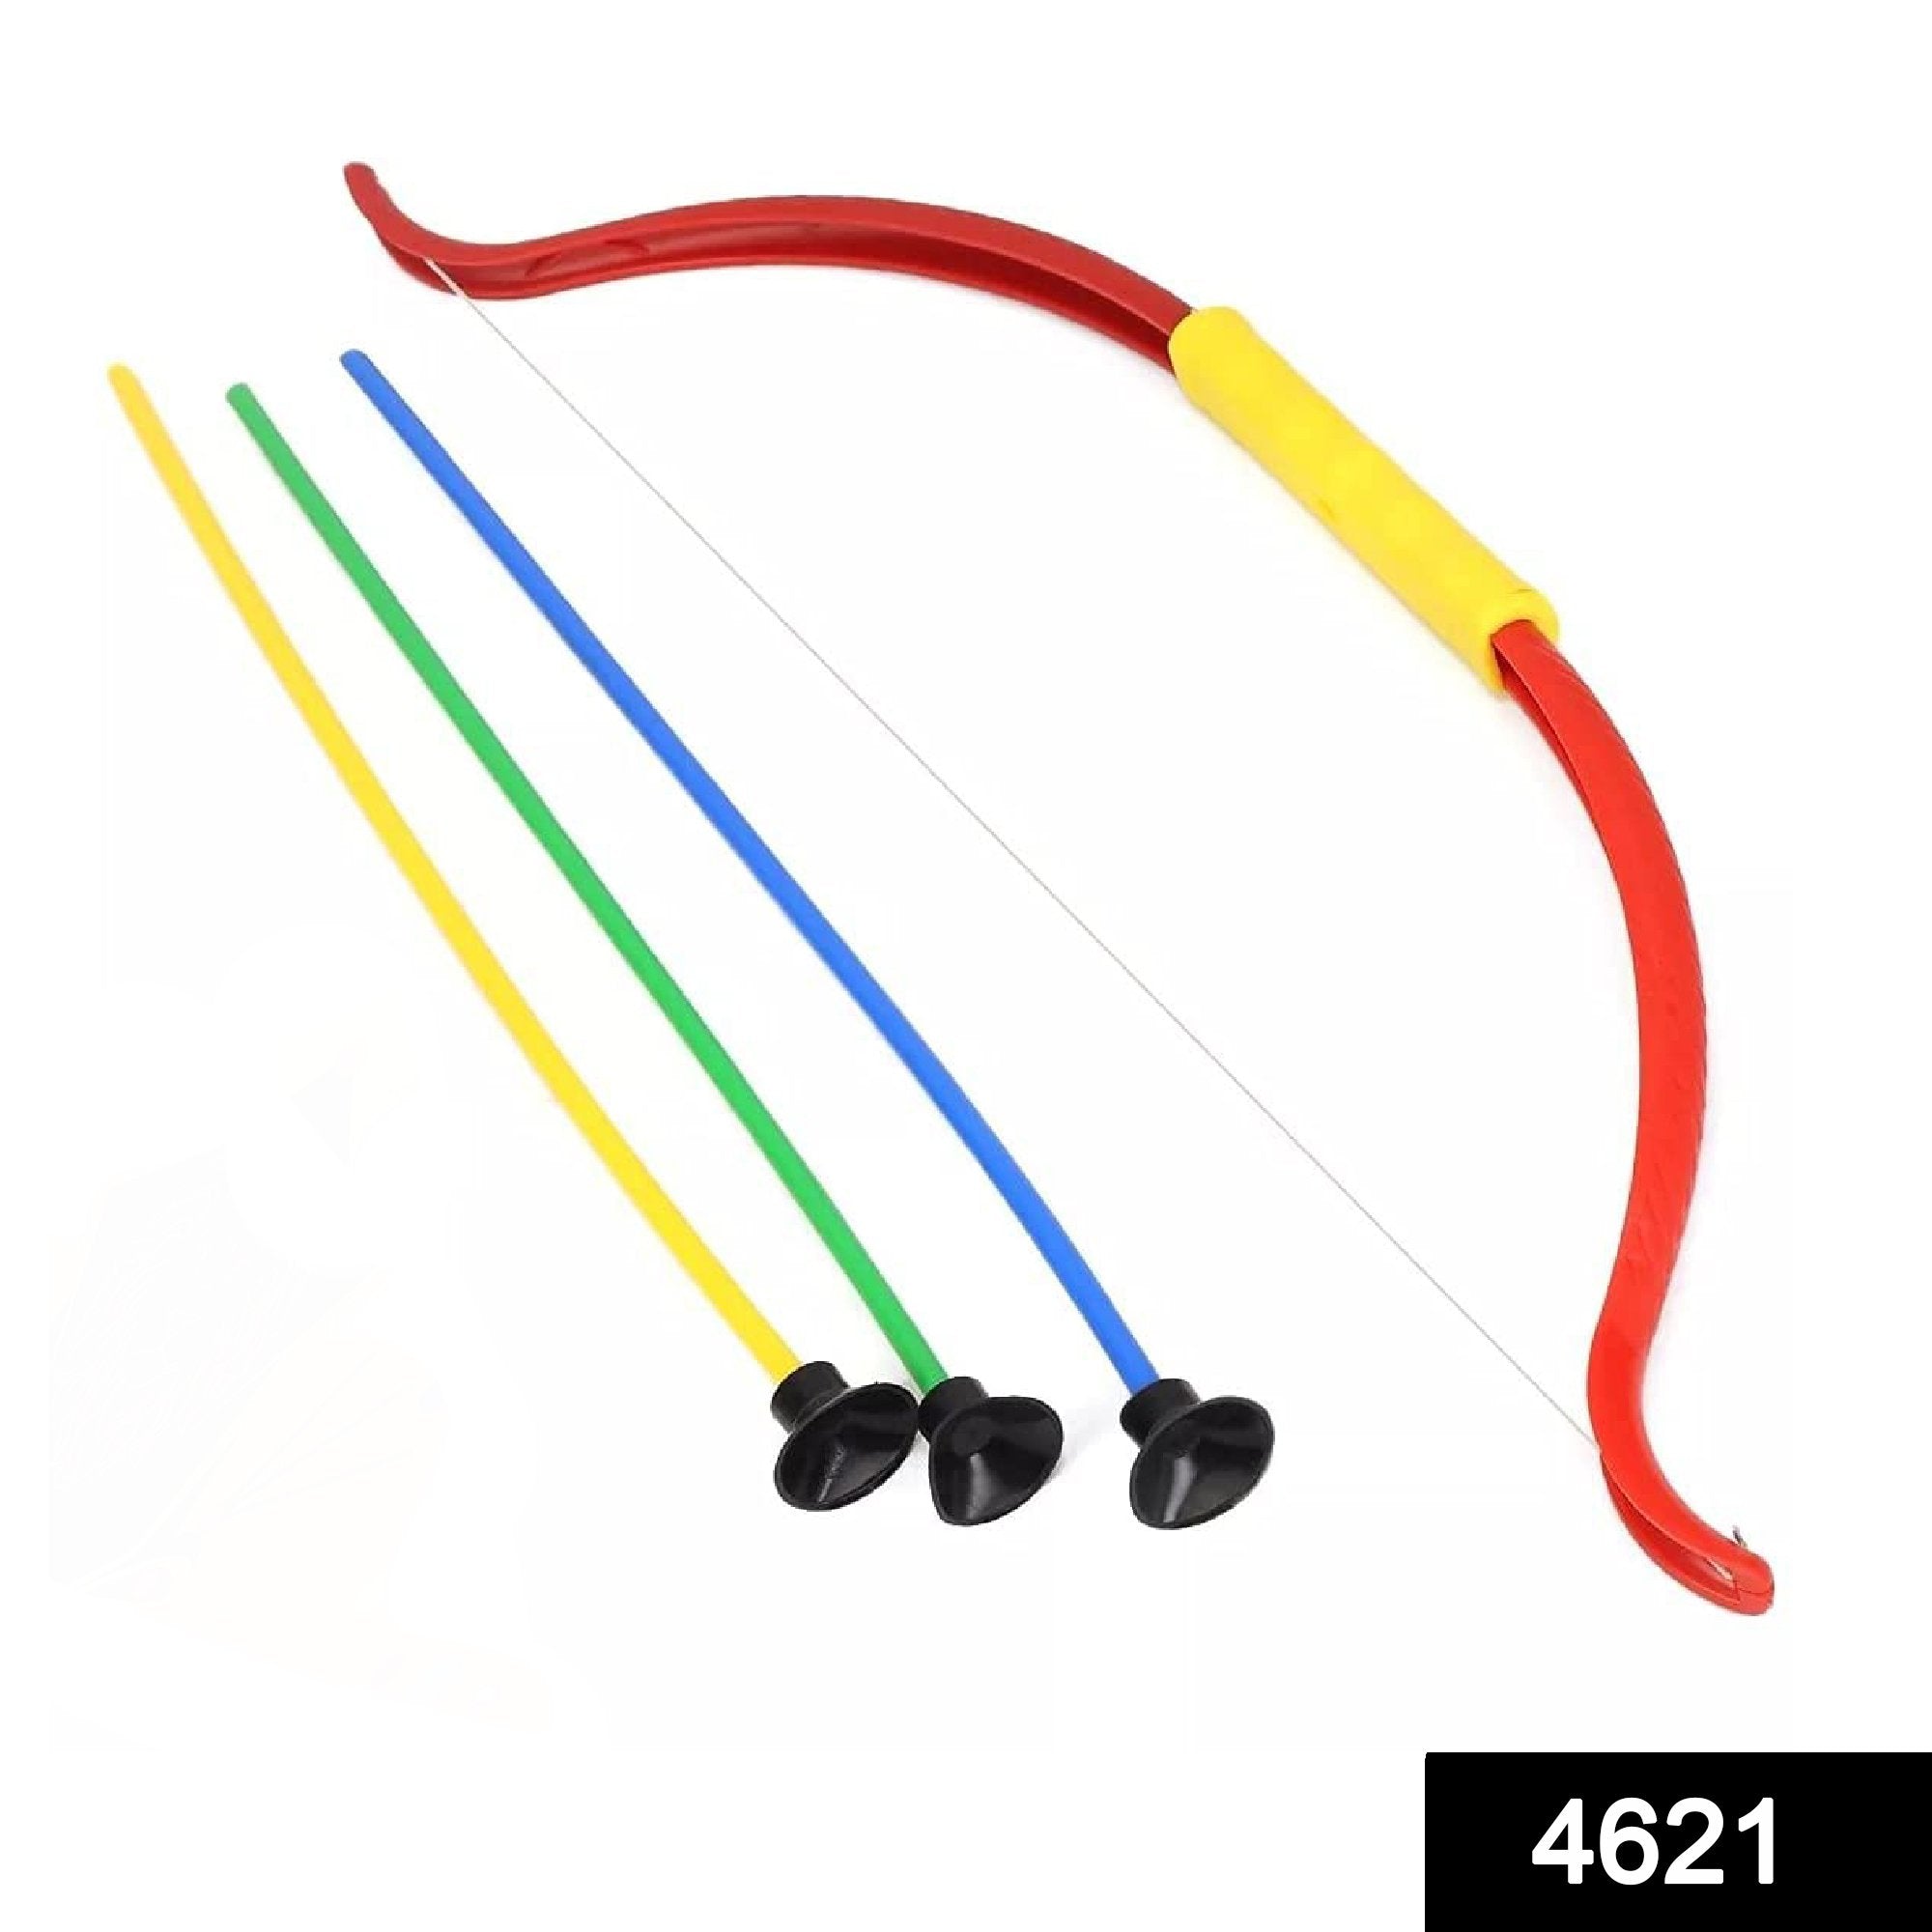 4621 Kids Archery Sport Bow and Arrow Toy Set with Quiver to Hold Arrows - SkyShopy